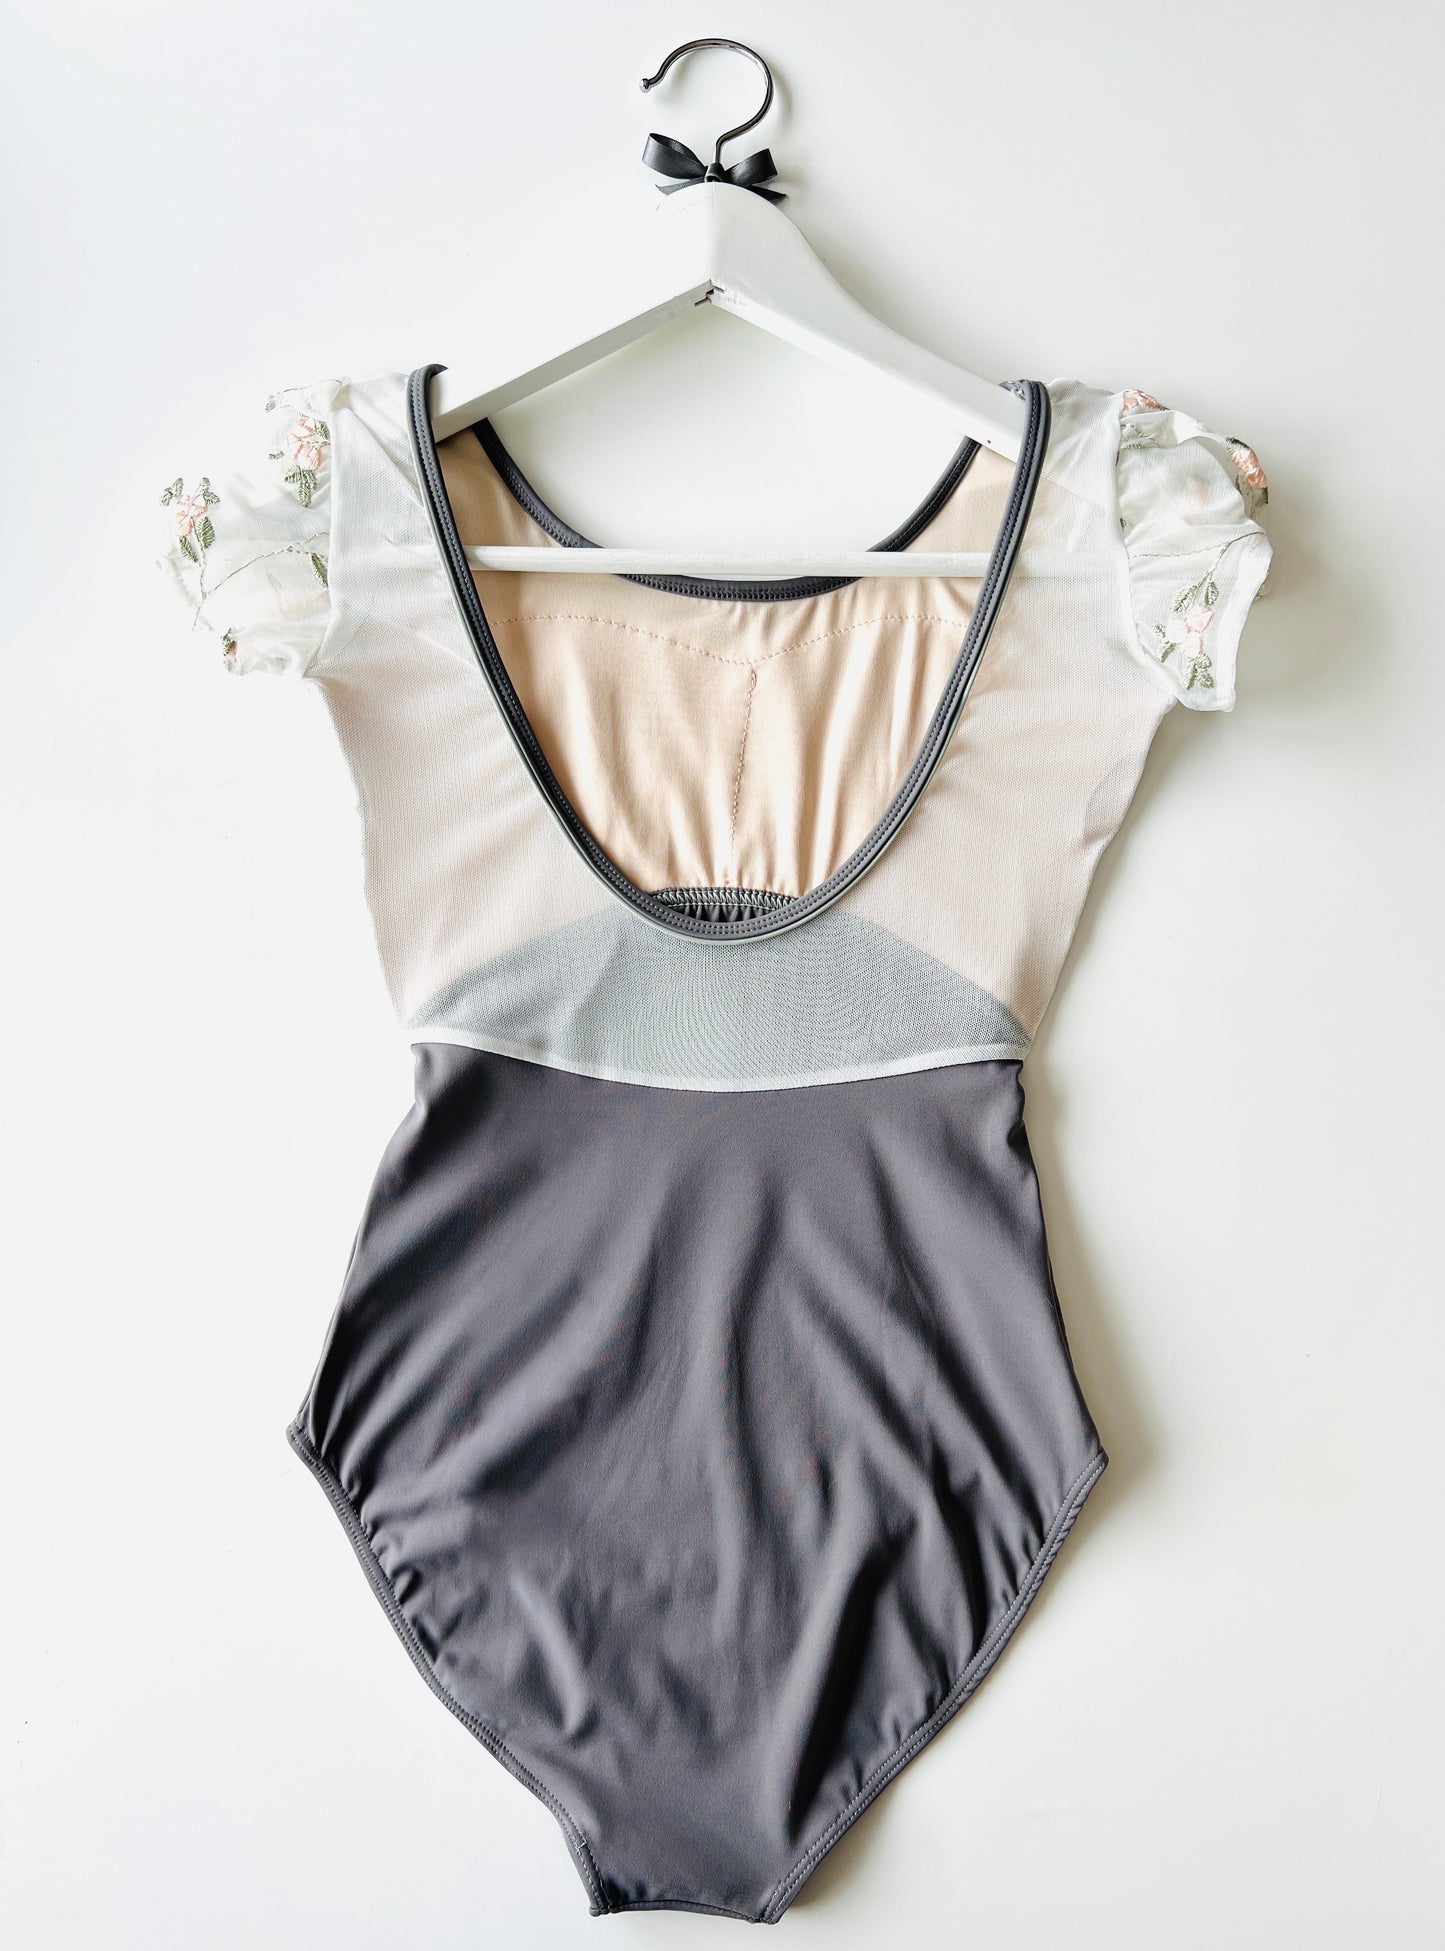 Rose embroidered ballet dance leotard in grey from The Collective Dancewear